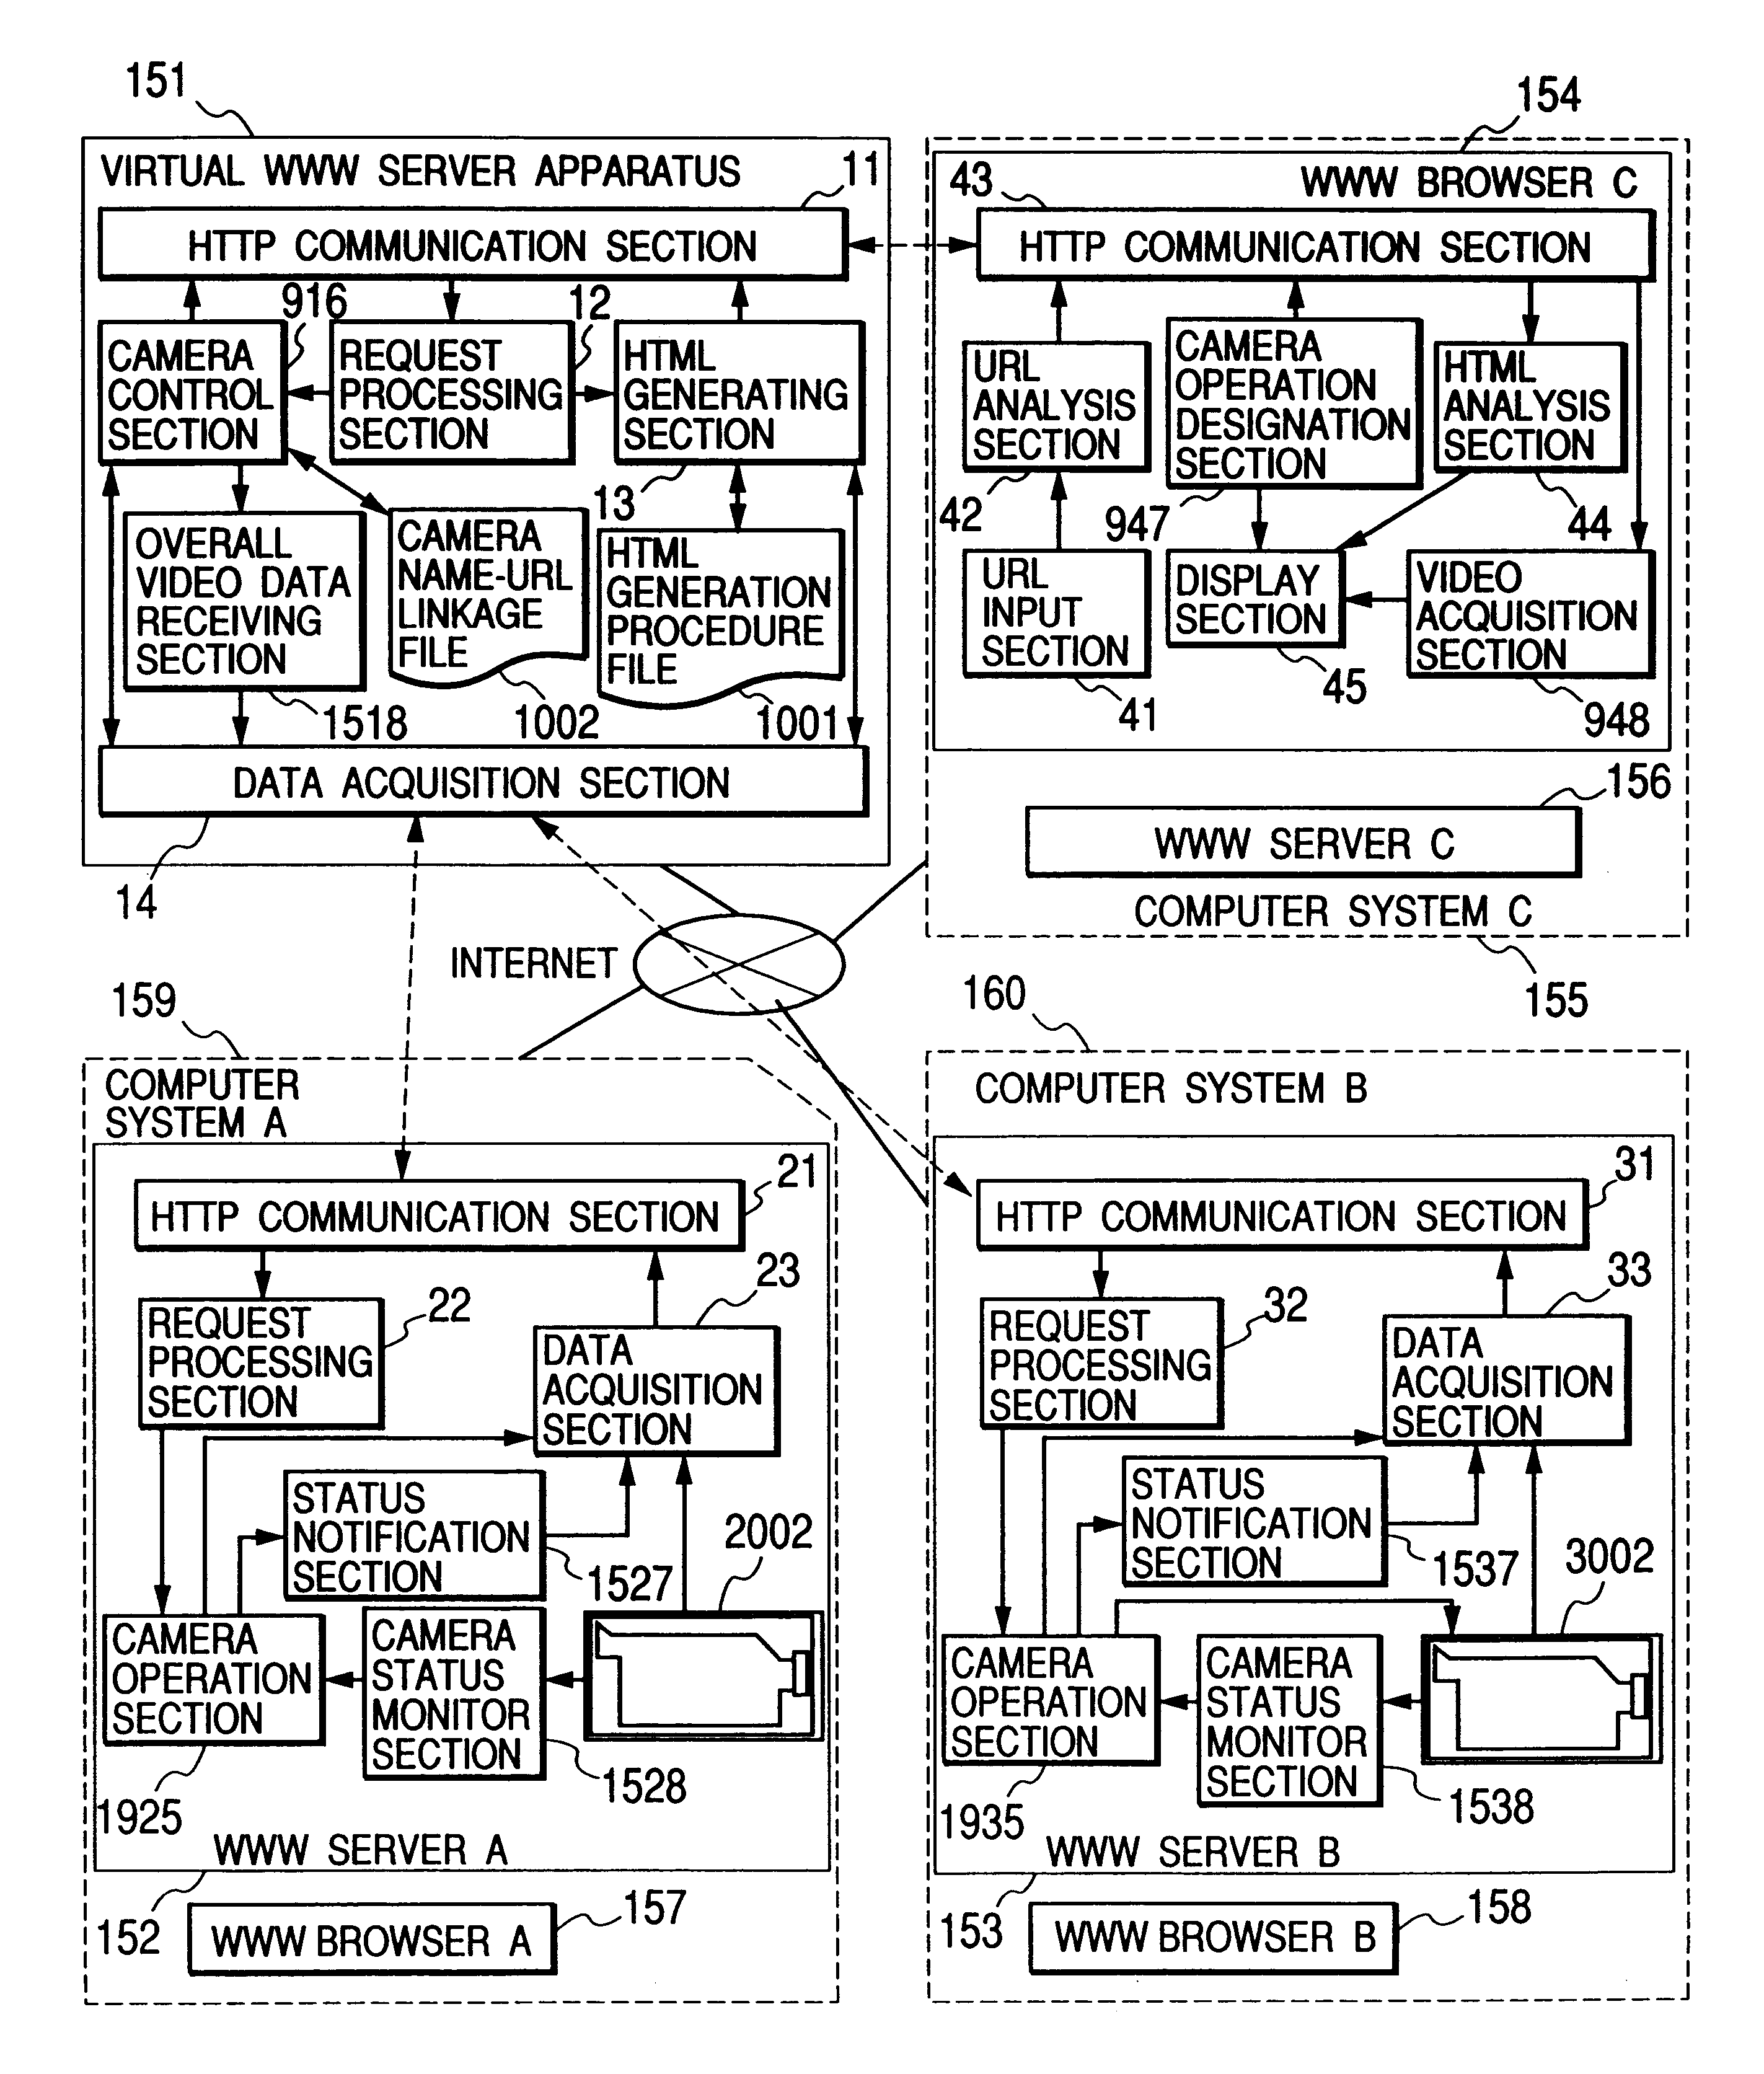 Virtual WWW server for enabling a single display screen of a browser to be utilized to concurrently display data of a plurality of files which are obtained from respective servers and to send commands to these servers